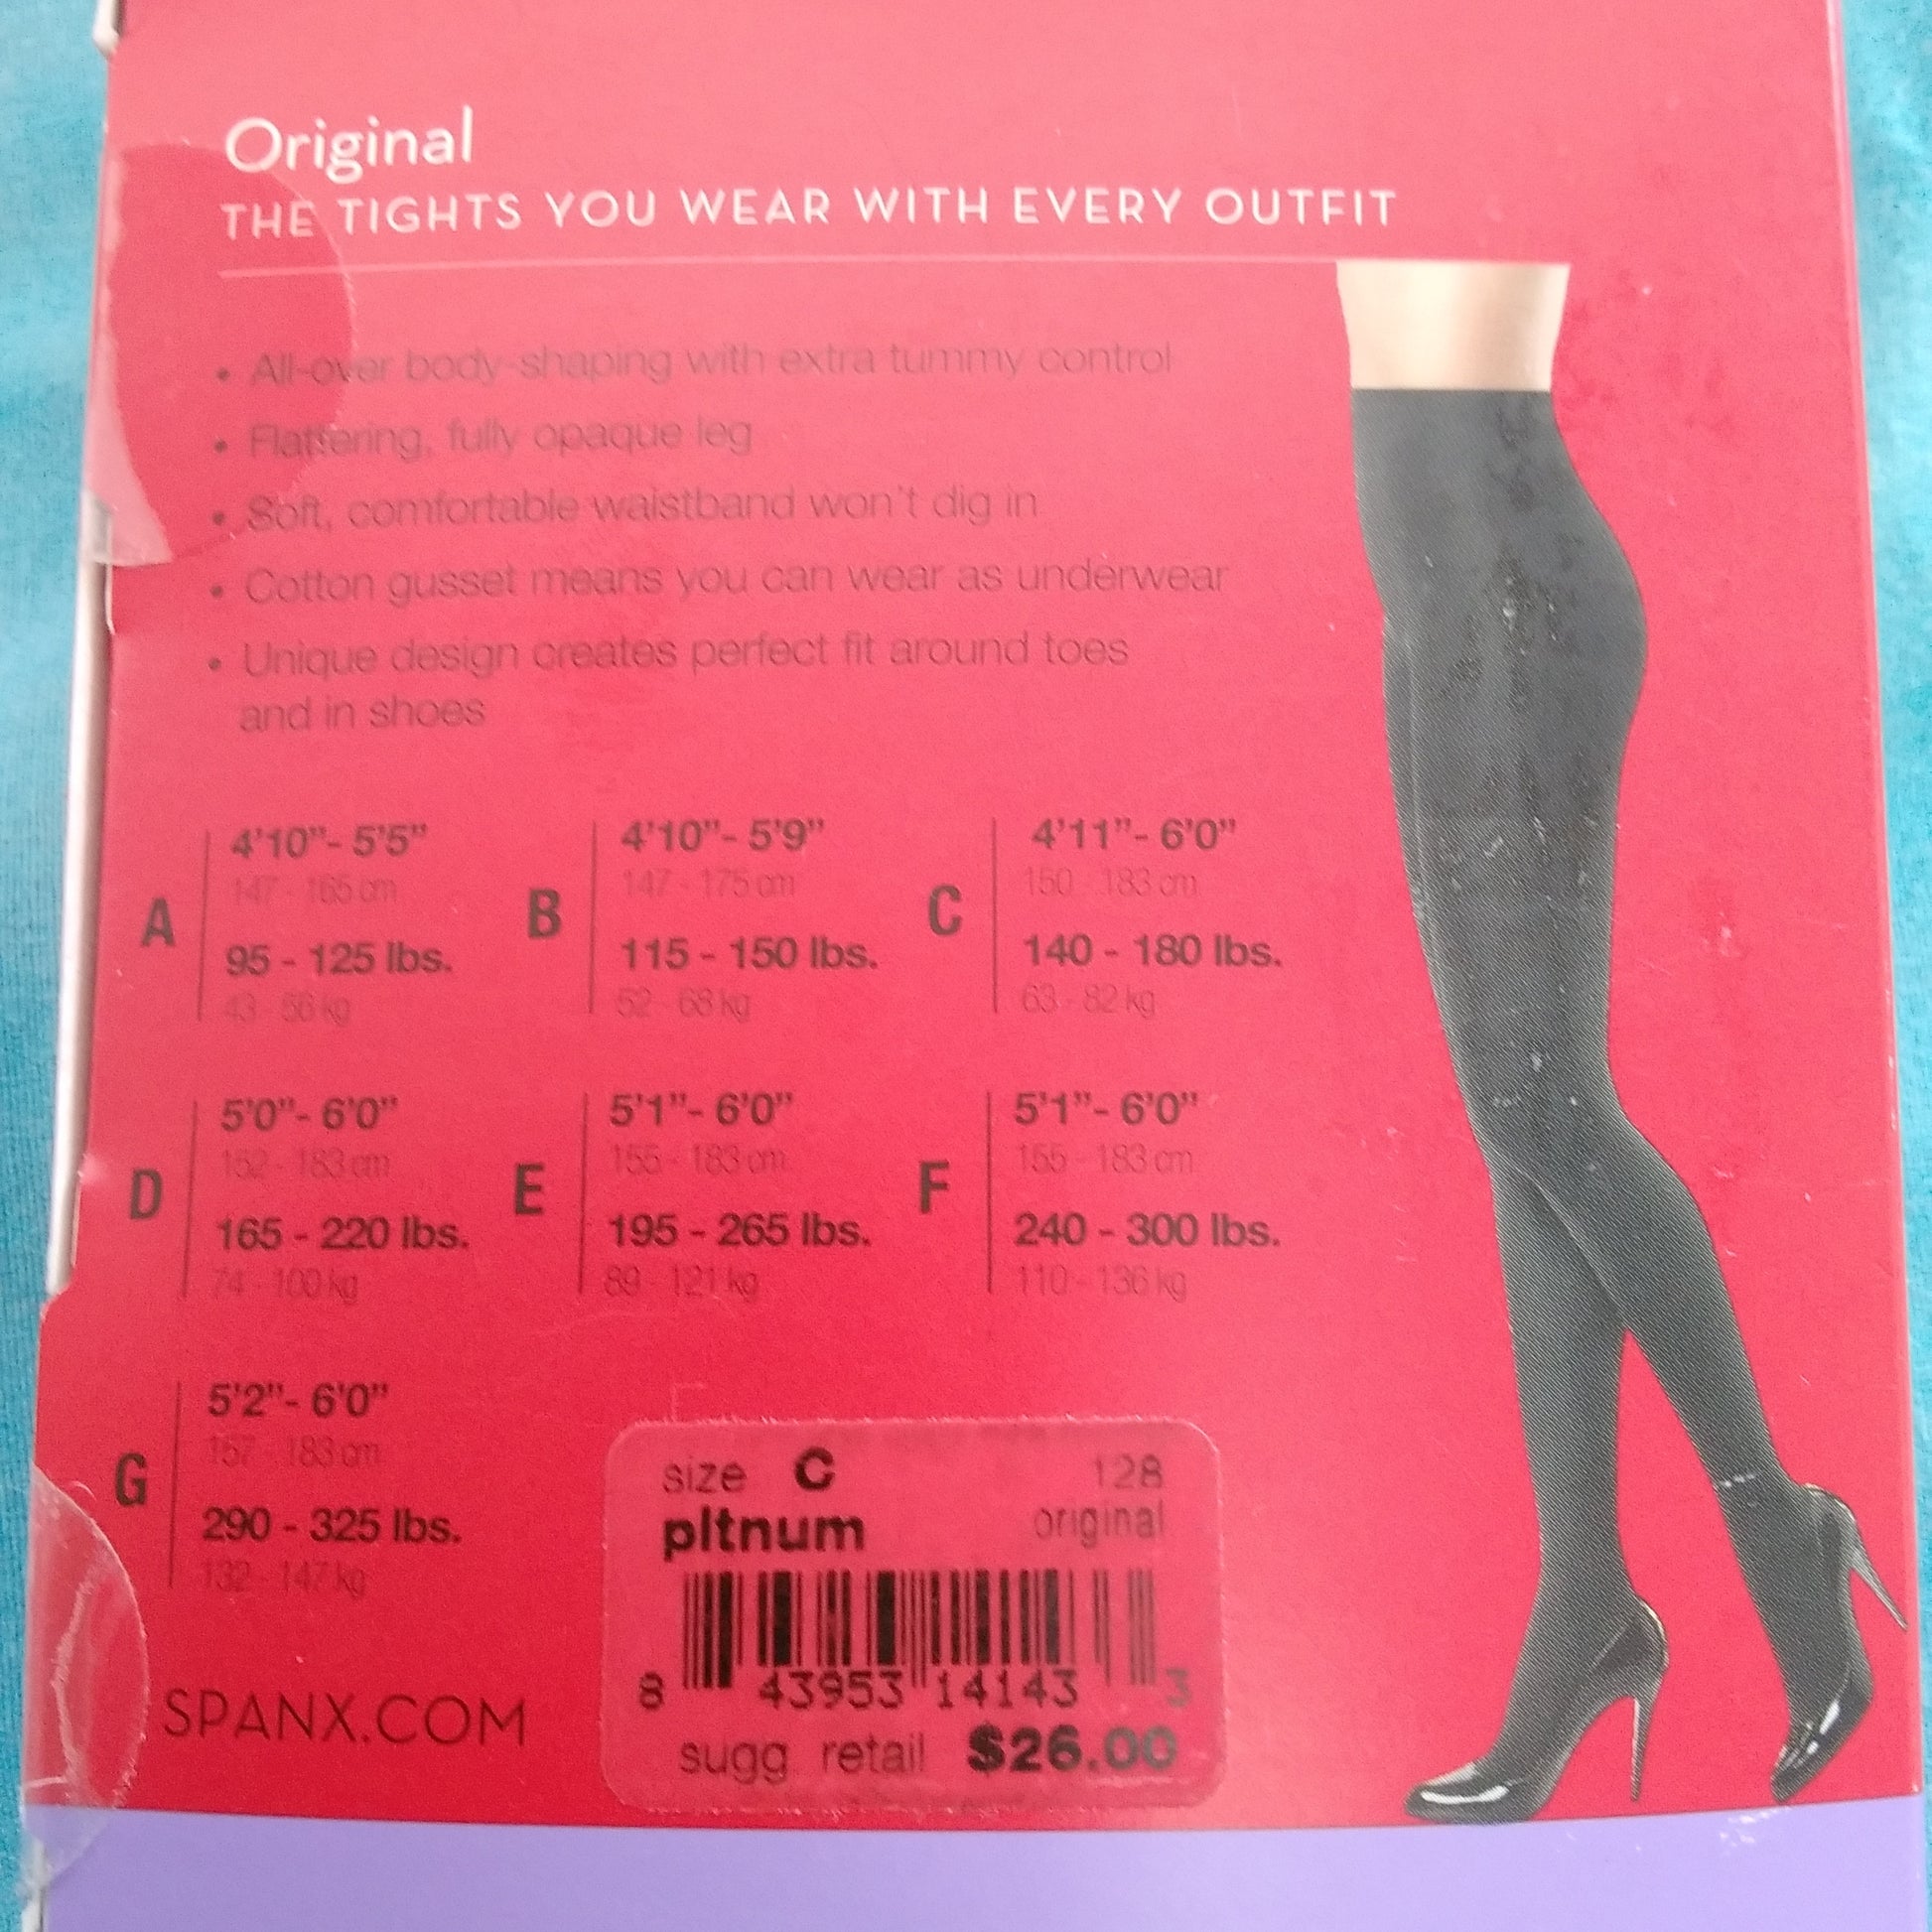 Red Hot by Spanx High-Waist Shaping Tights